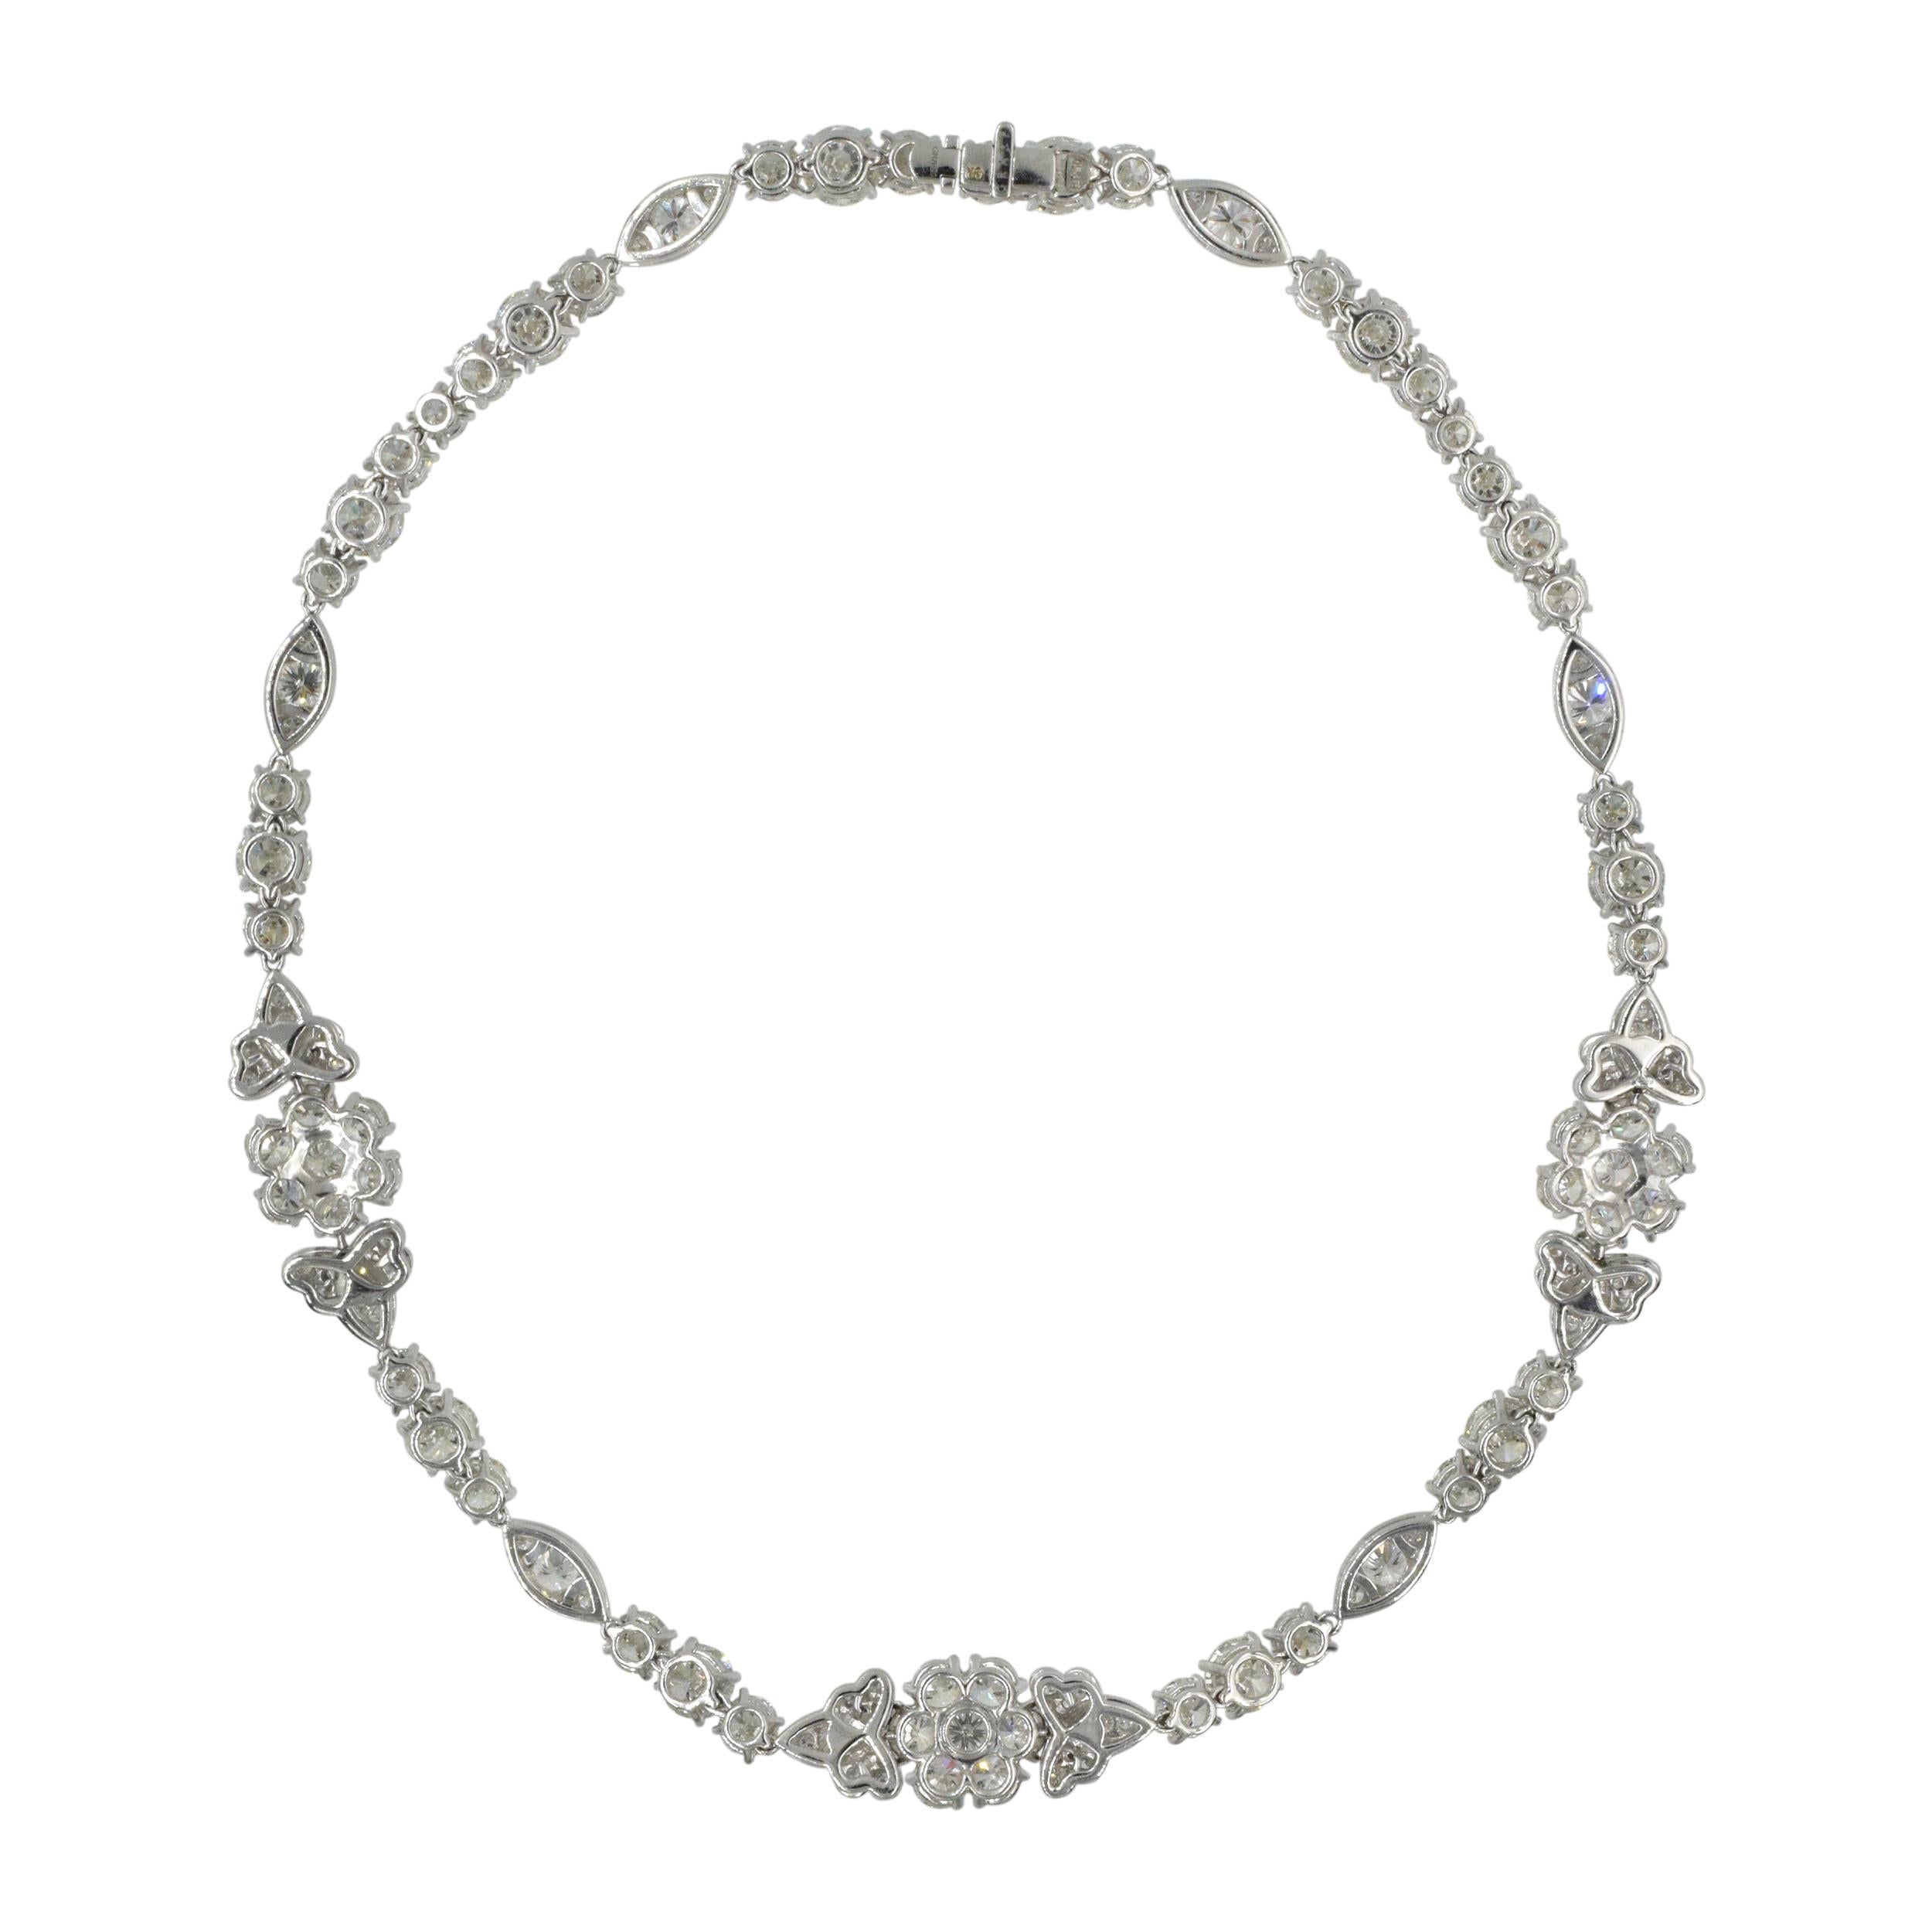 Graff Diamond  Necklace This diamond necklace has a floral design with circular-cut diamonds
weighing a total approximately of  37.49 carats very fine quality diamonds all set in platinum and white gold,
Signed Graff, no. GNxxxx 
Length: 15.75